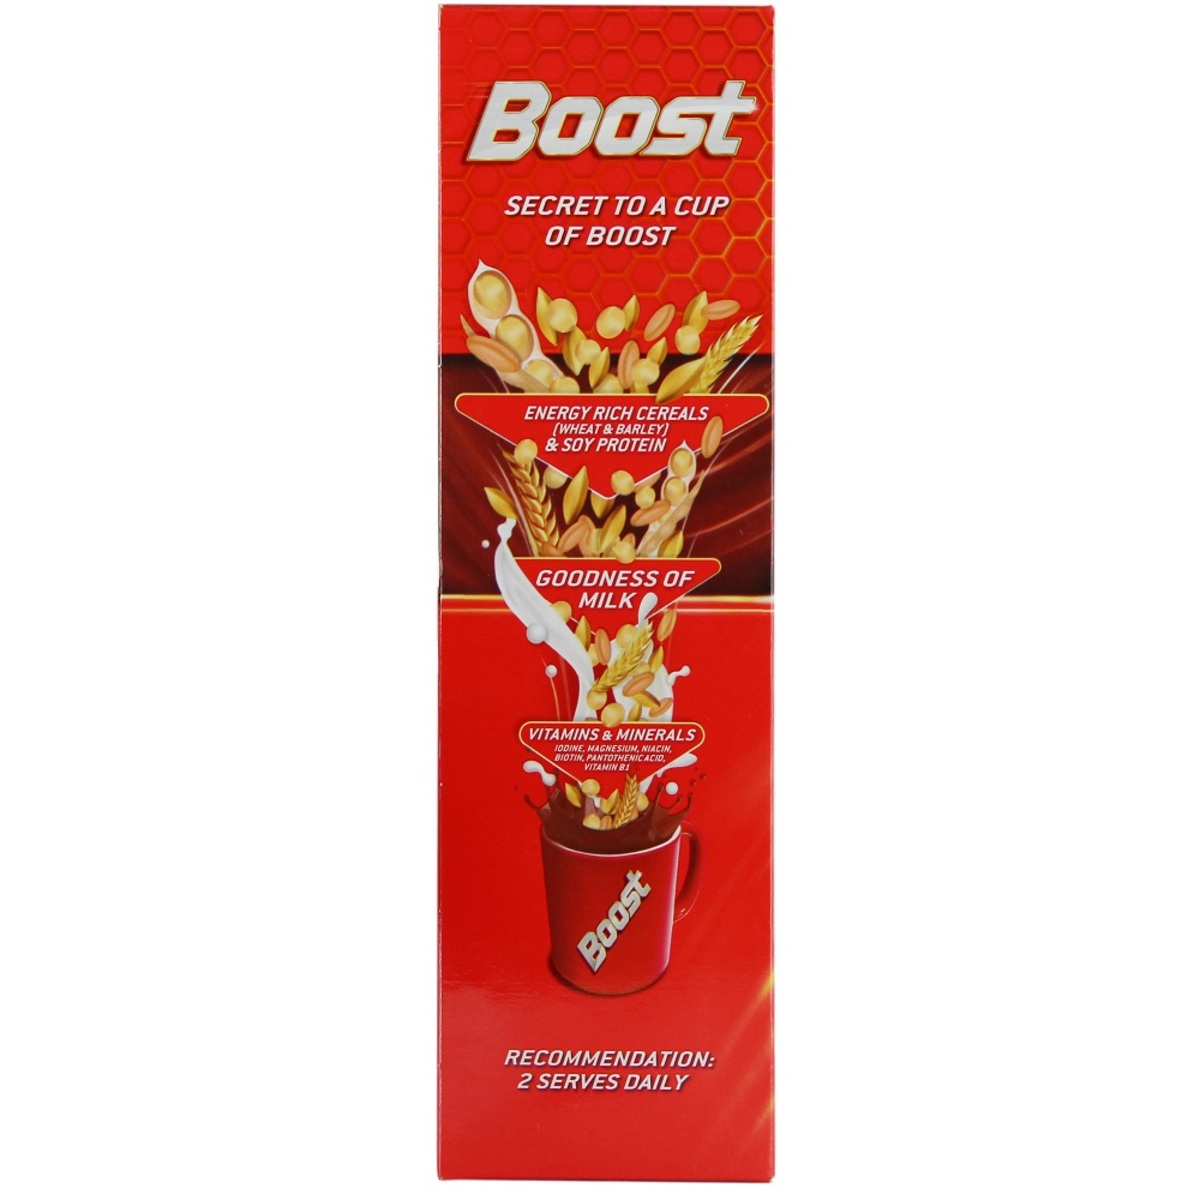 Boost Energy Drink Refill 500g